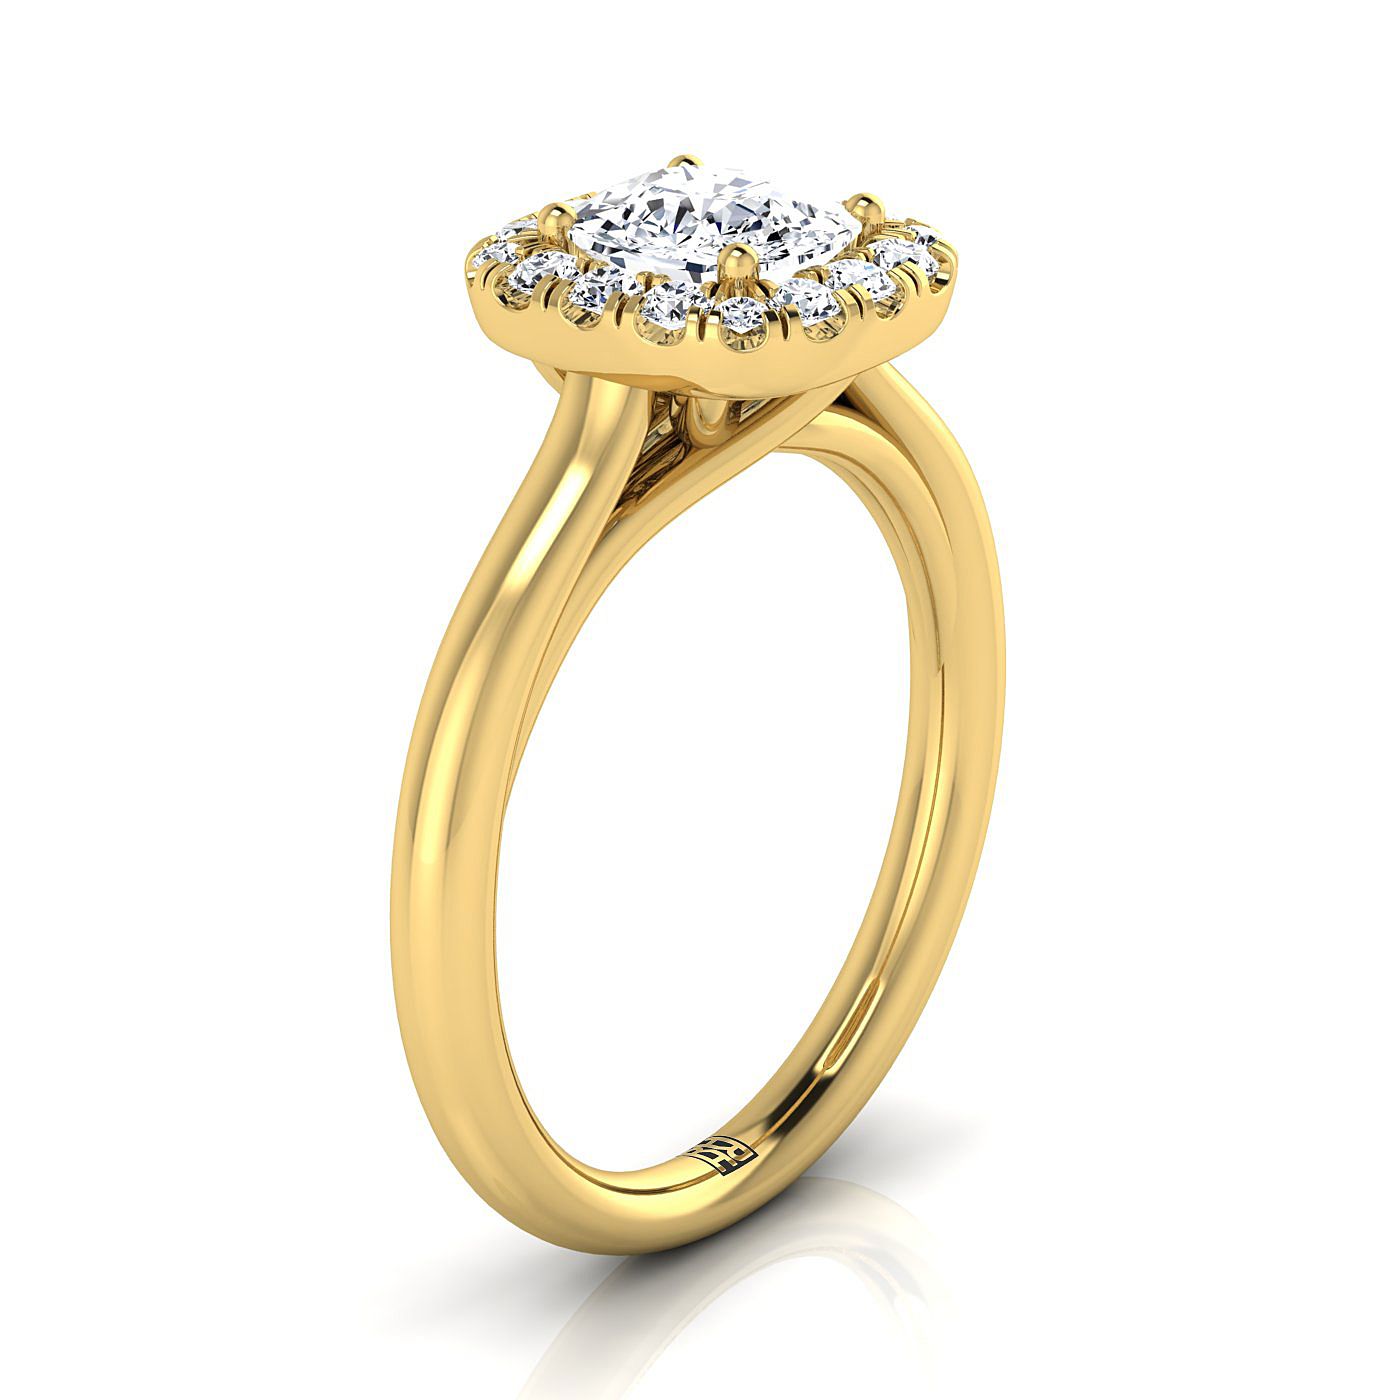 18K Yellow Gold Cushion Diamond Sophisticated and Simple Halo on a High Polished Engagement Ring -1/4ctw